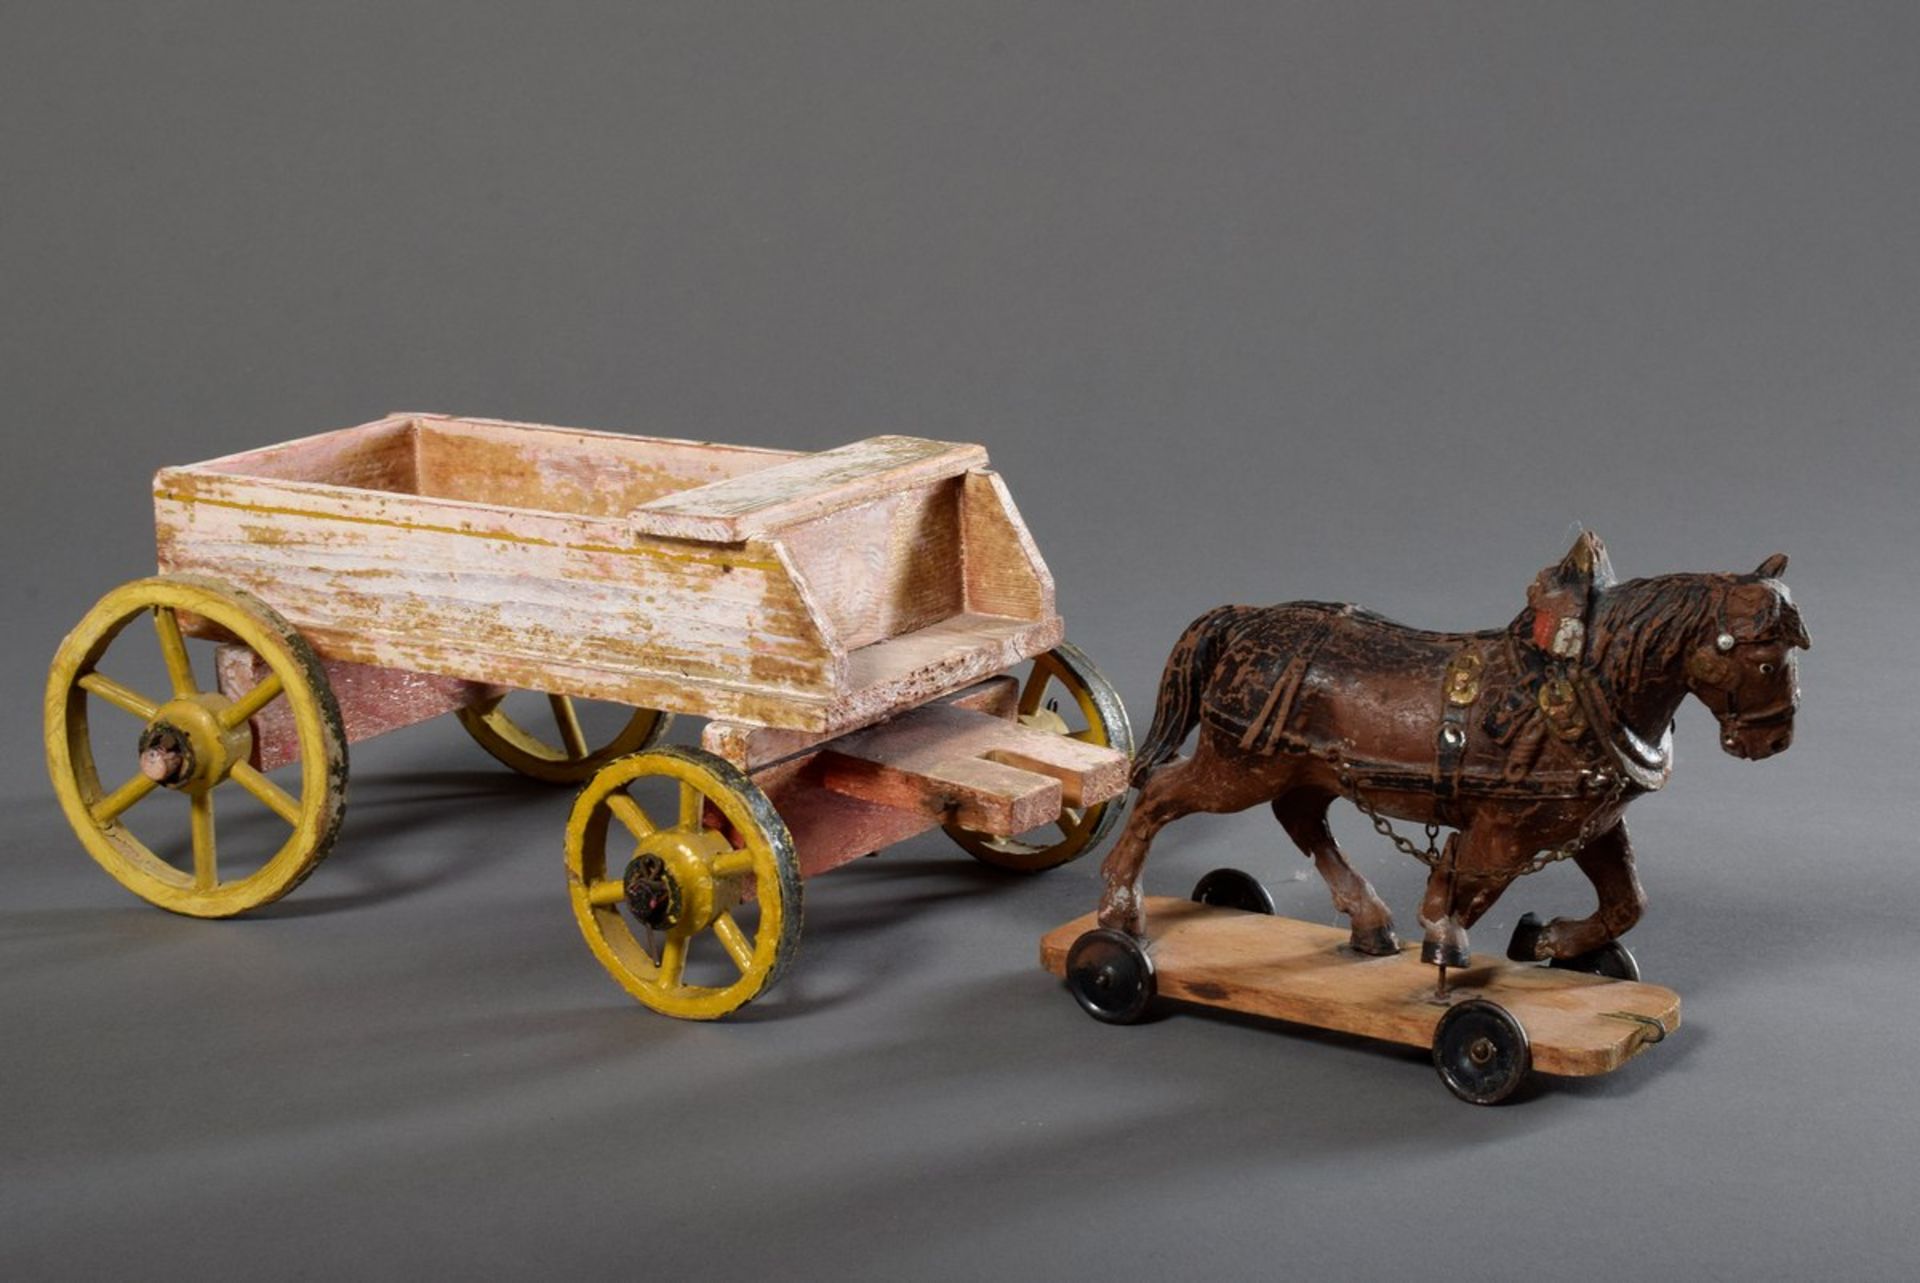 2 Parts old toys for children: "Carriage" and "Horse on wheels", wood with remains of old paint, 13